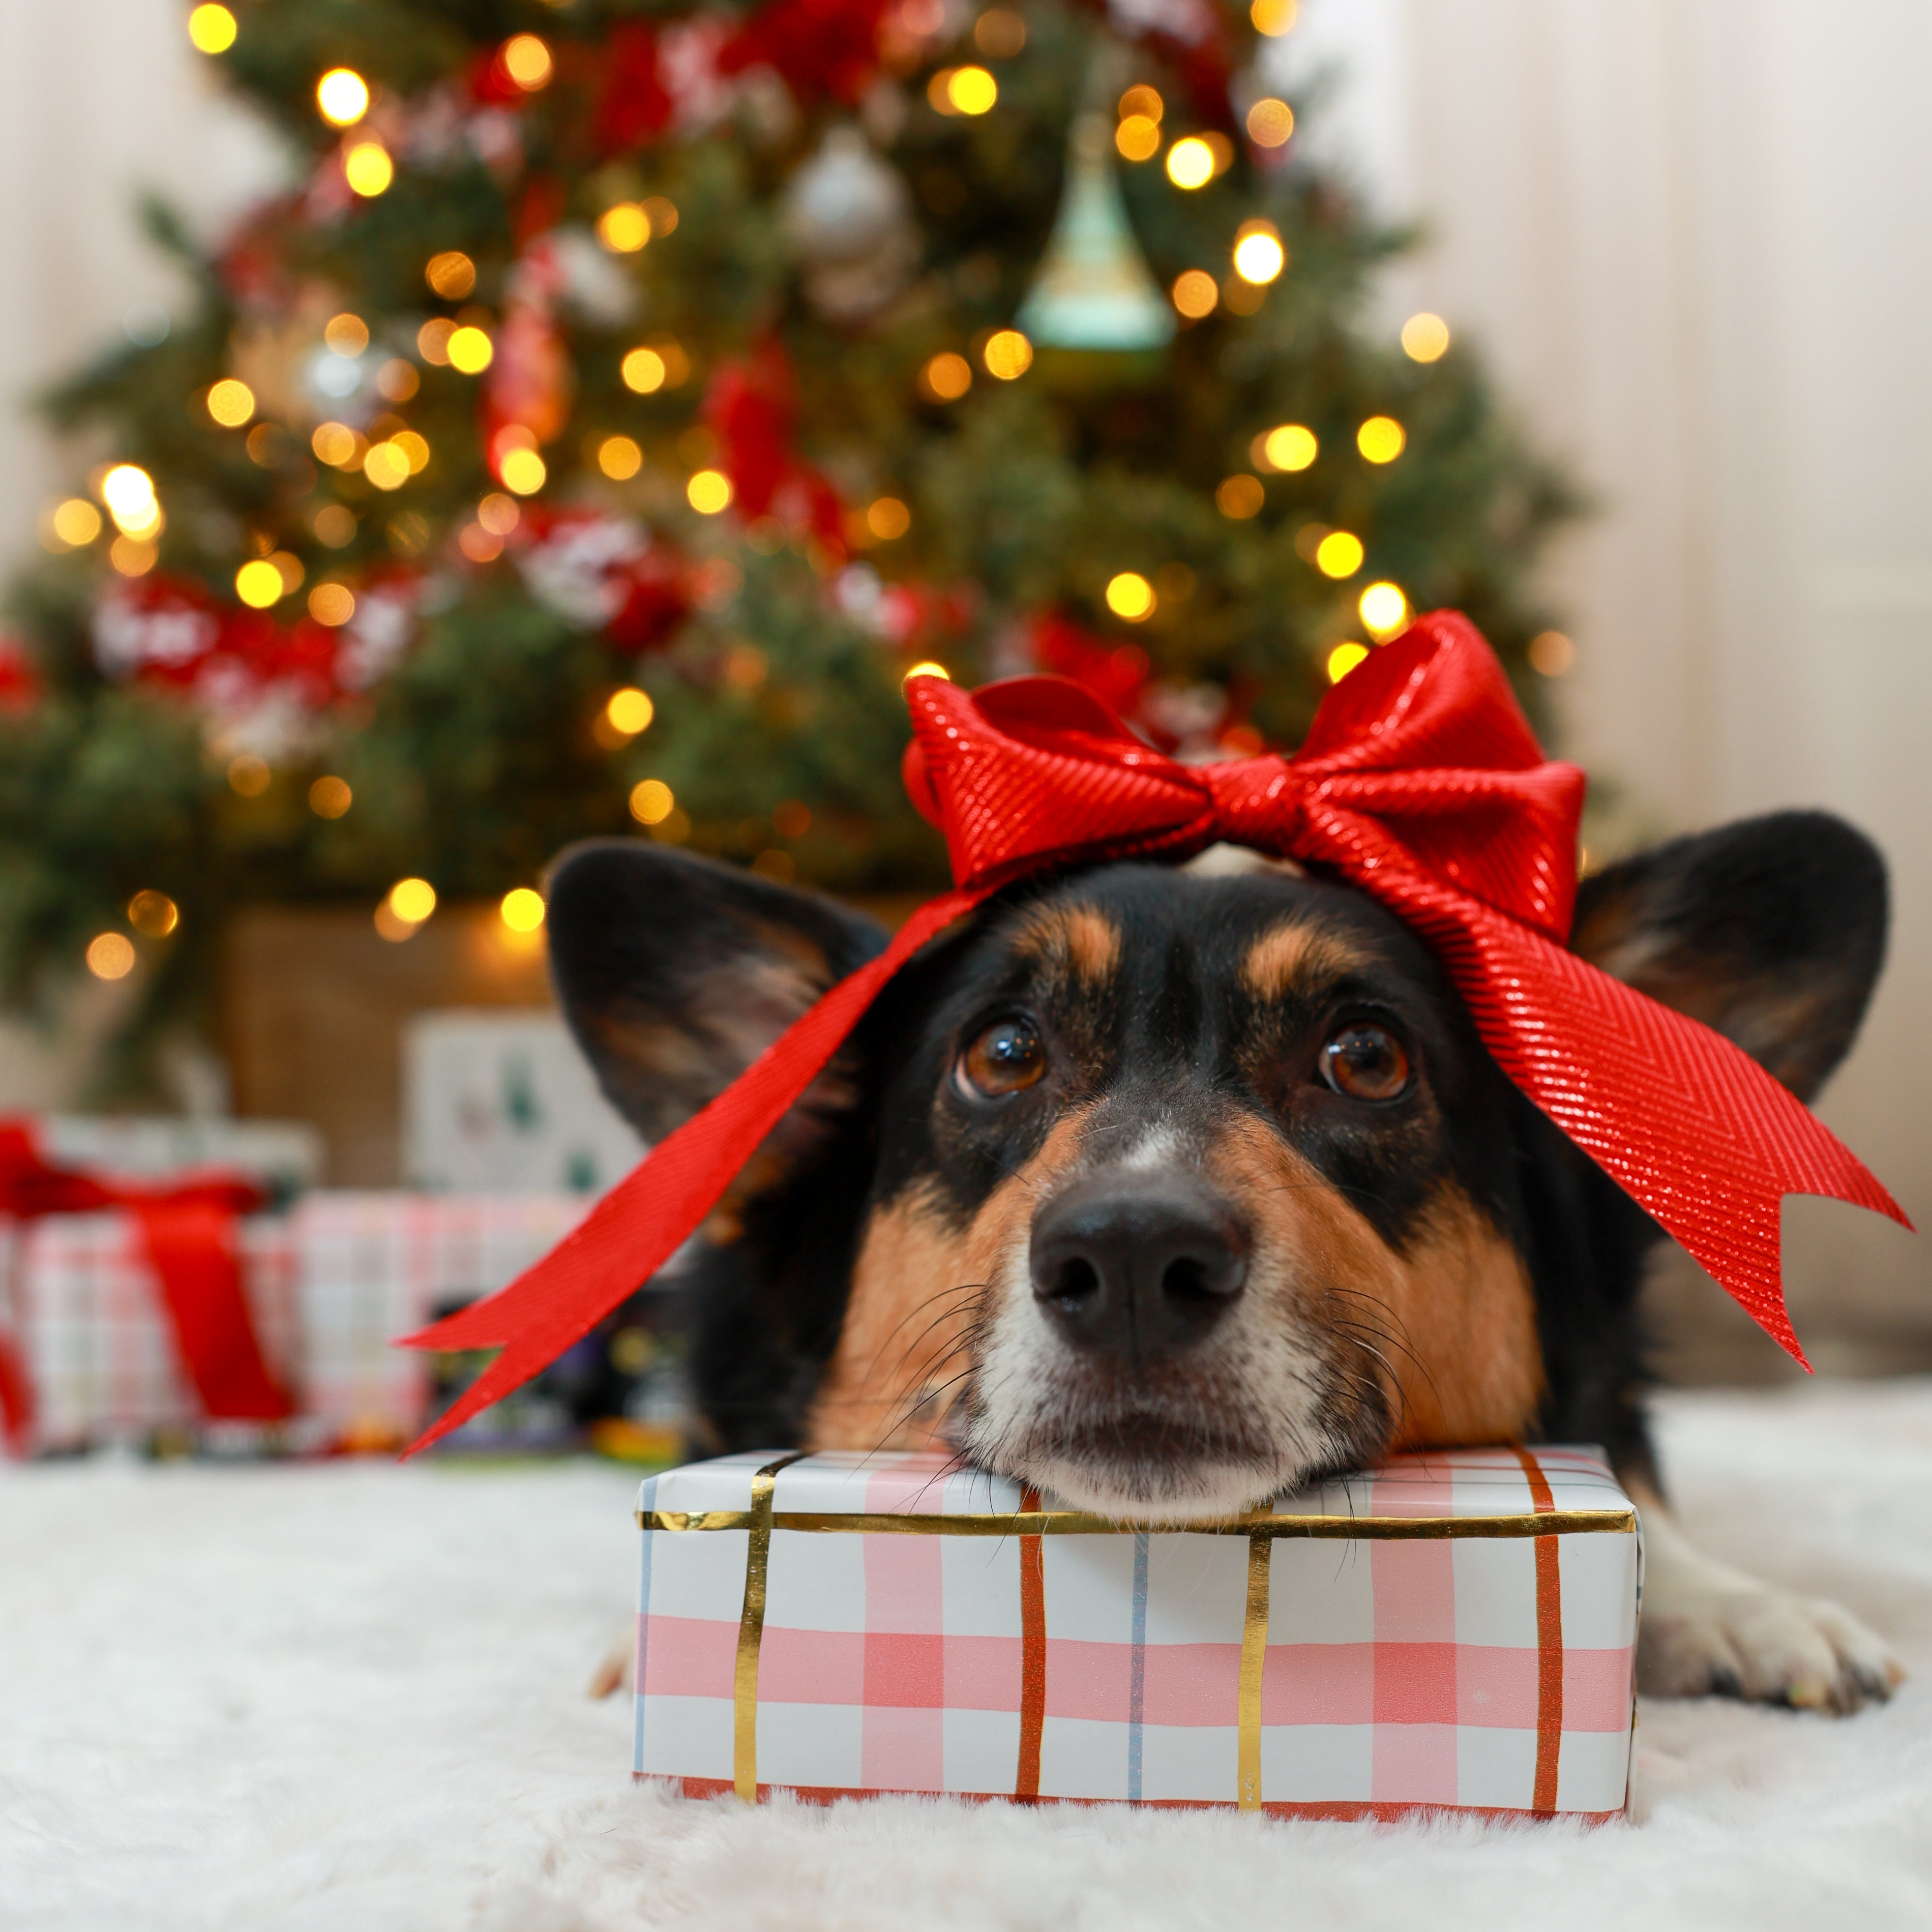 How to Include Your Pet in Holiday Traditions